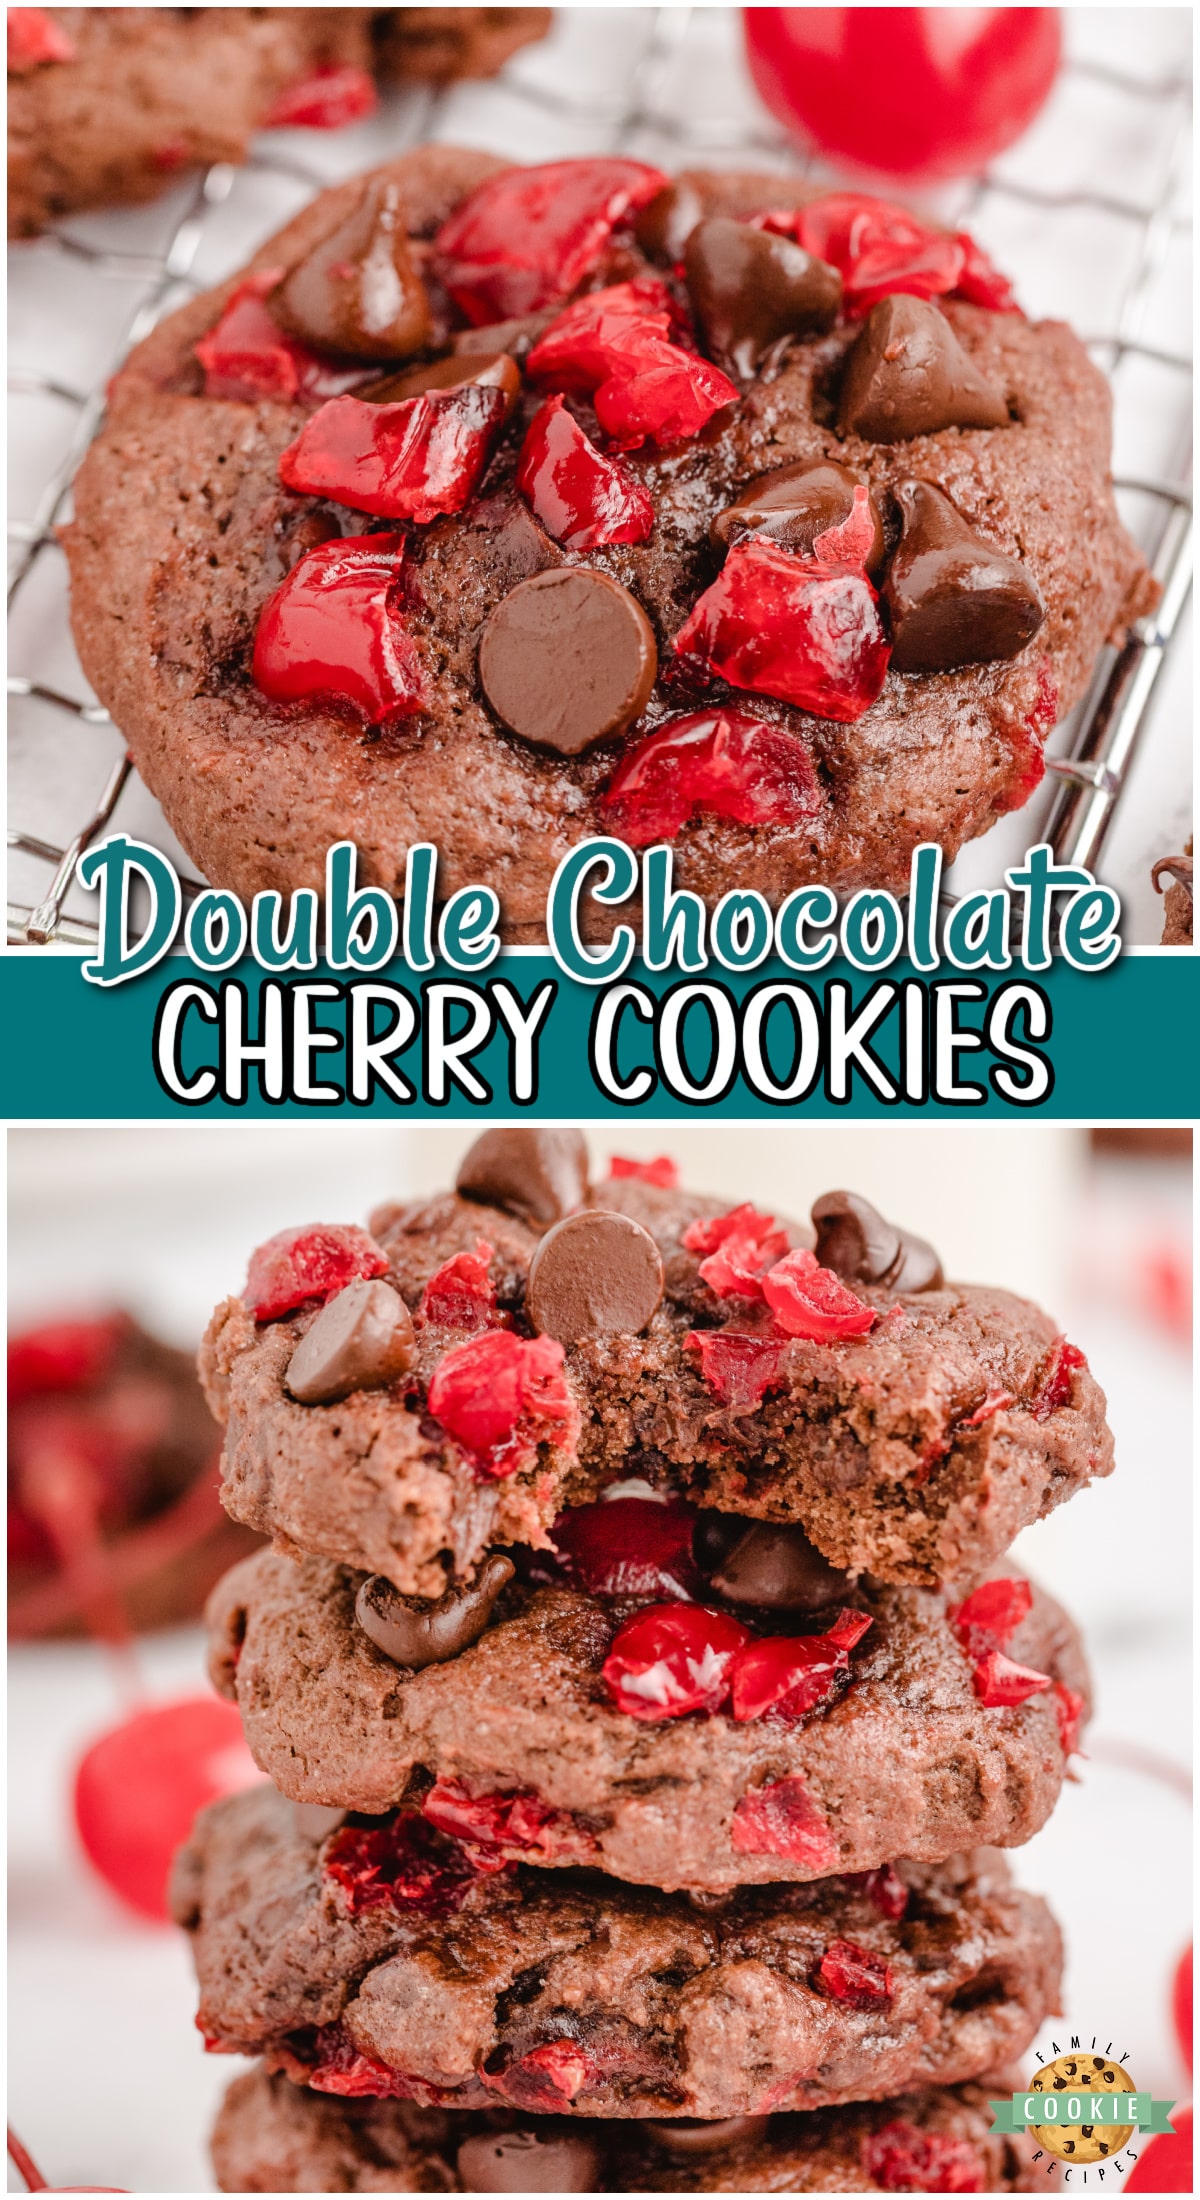 Chocolate Cherry Cookies are Black Forest Cake in cookie form! Soft & chewy chocolate cookies with chocolate chips & cherry bits!